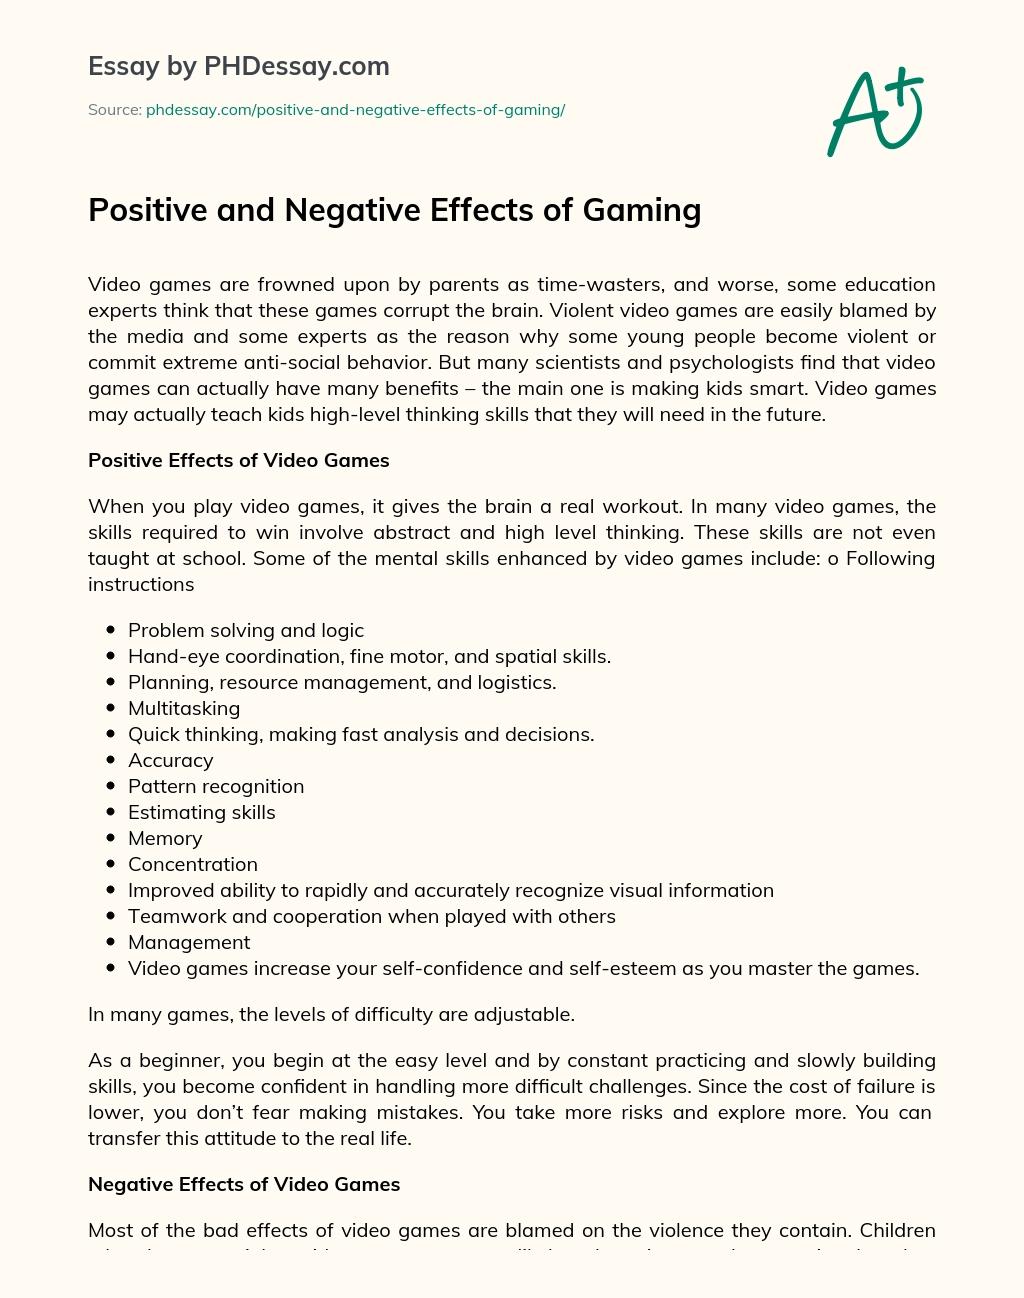 Positive Effect of Video Games | Free Essay Example 